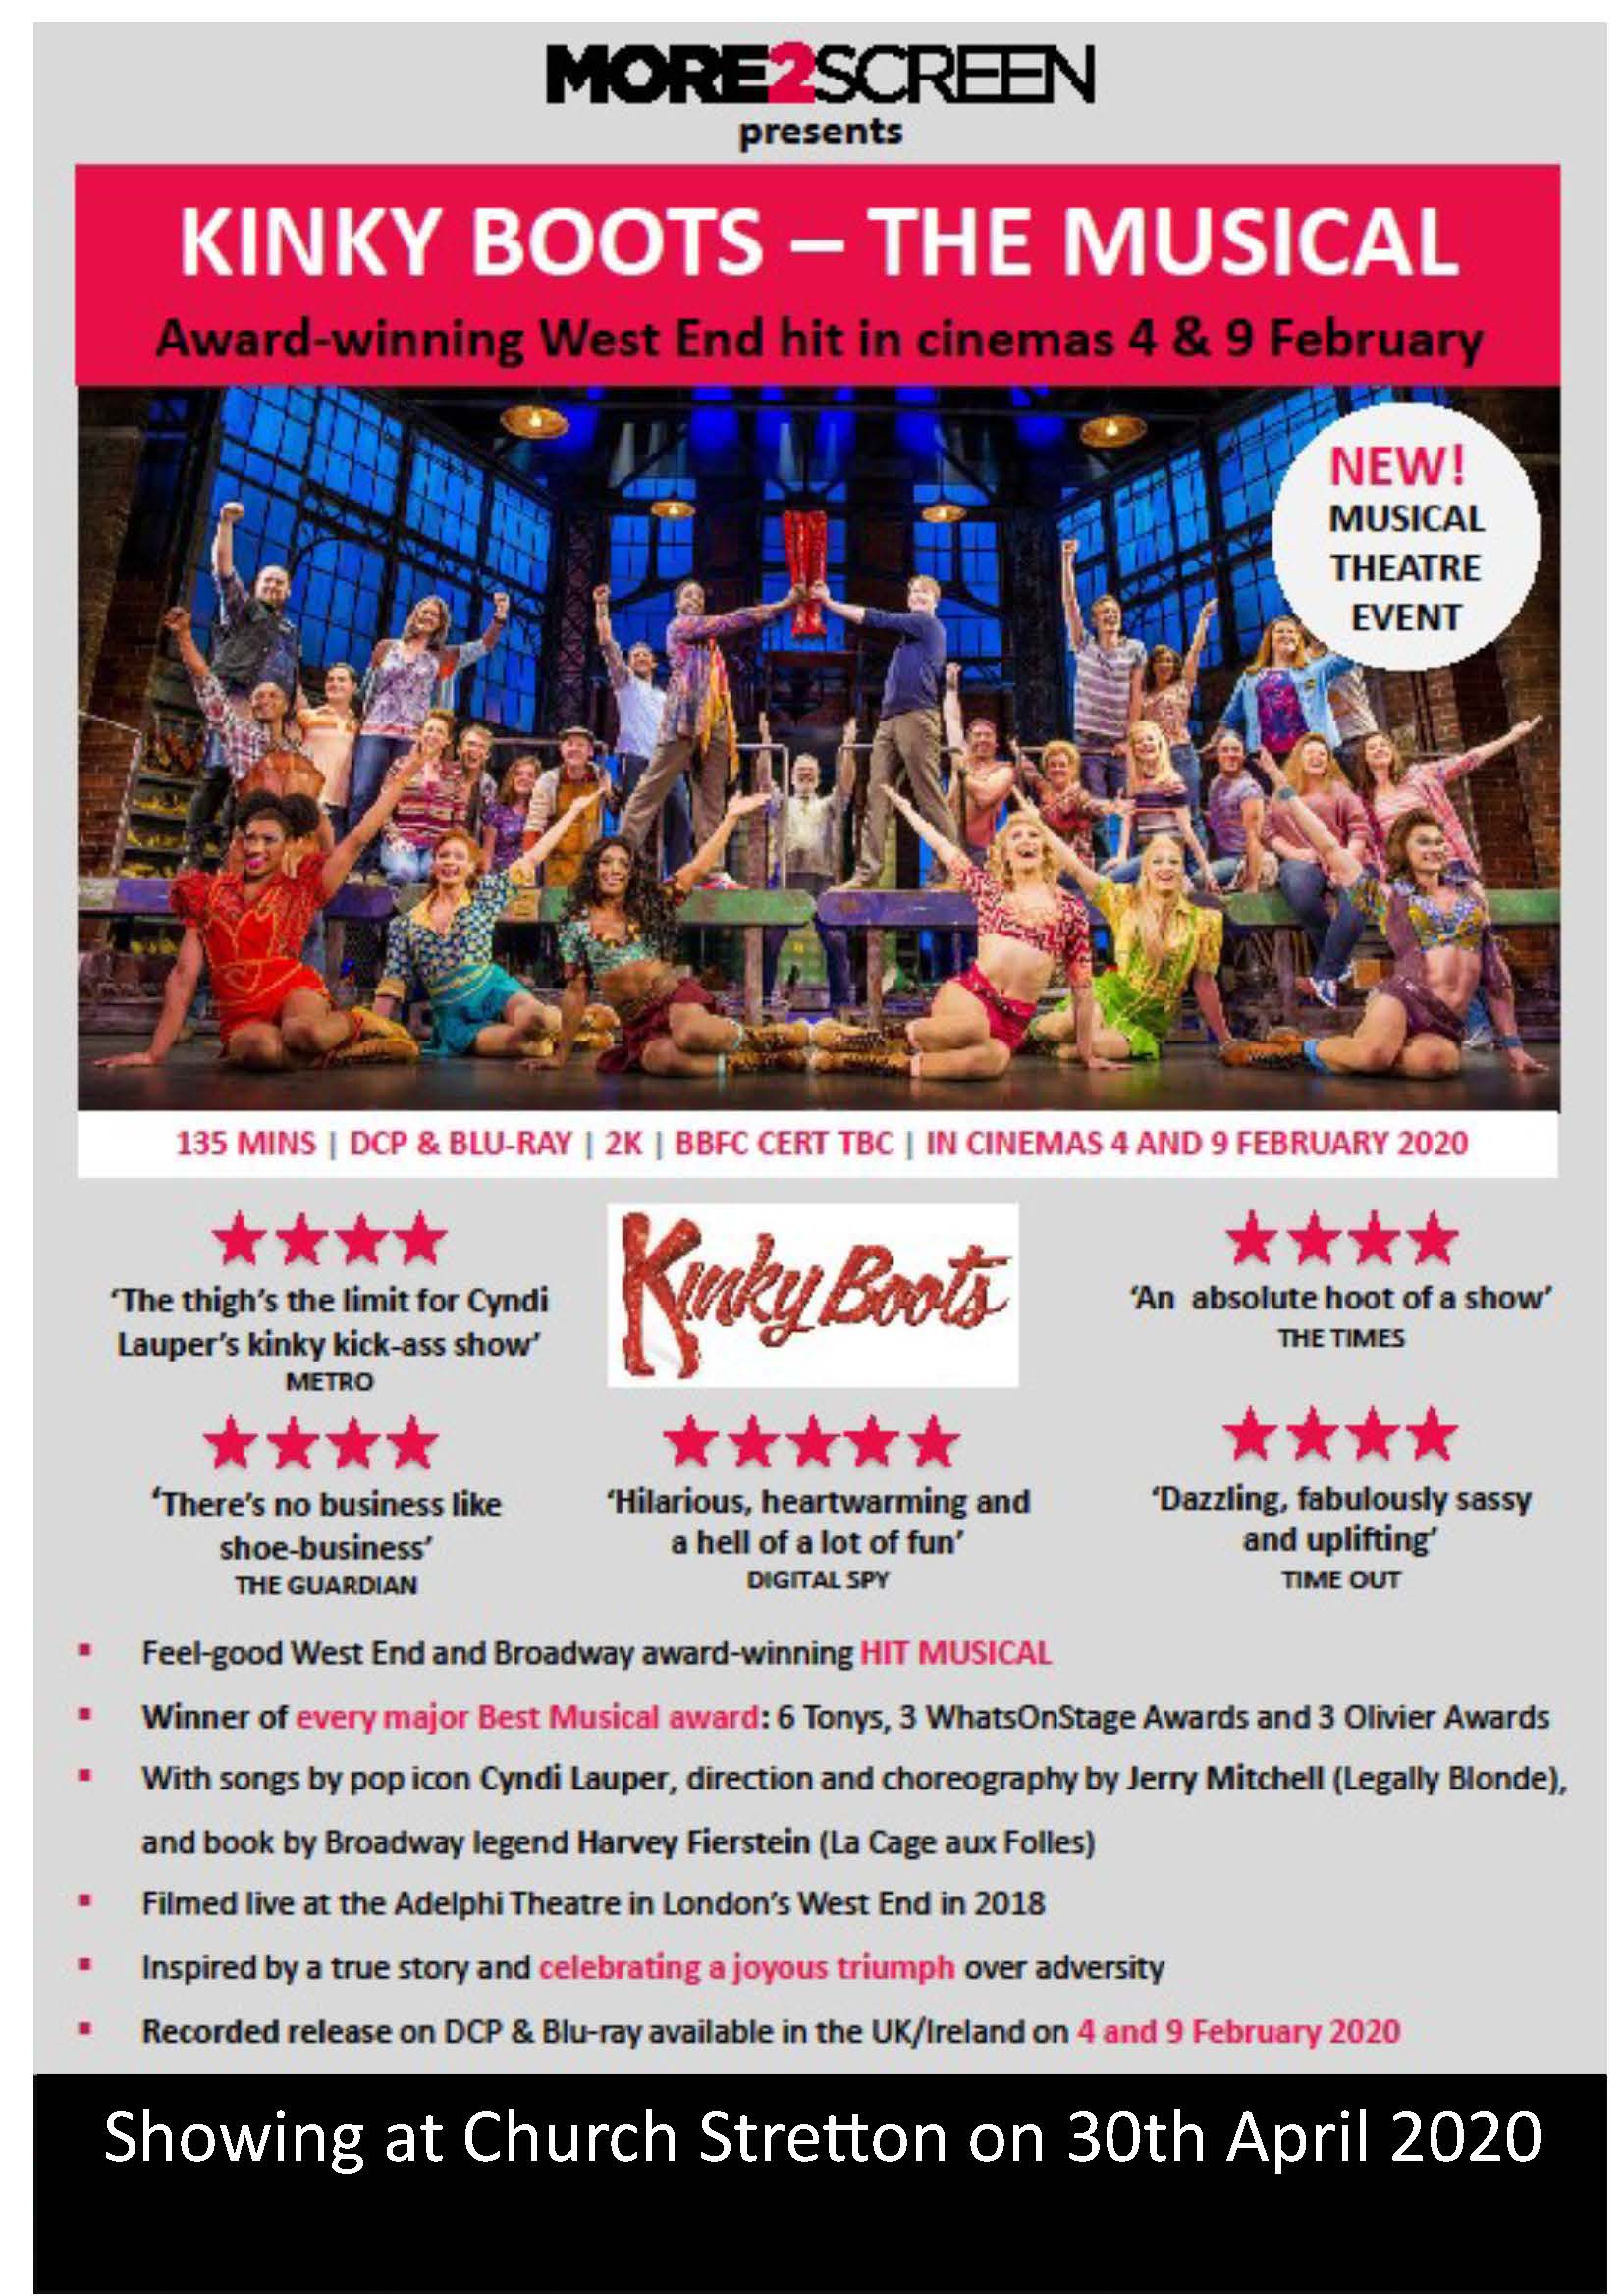 kinky boots early poster